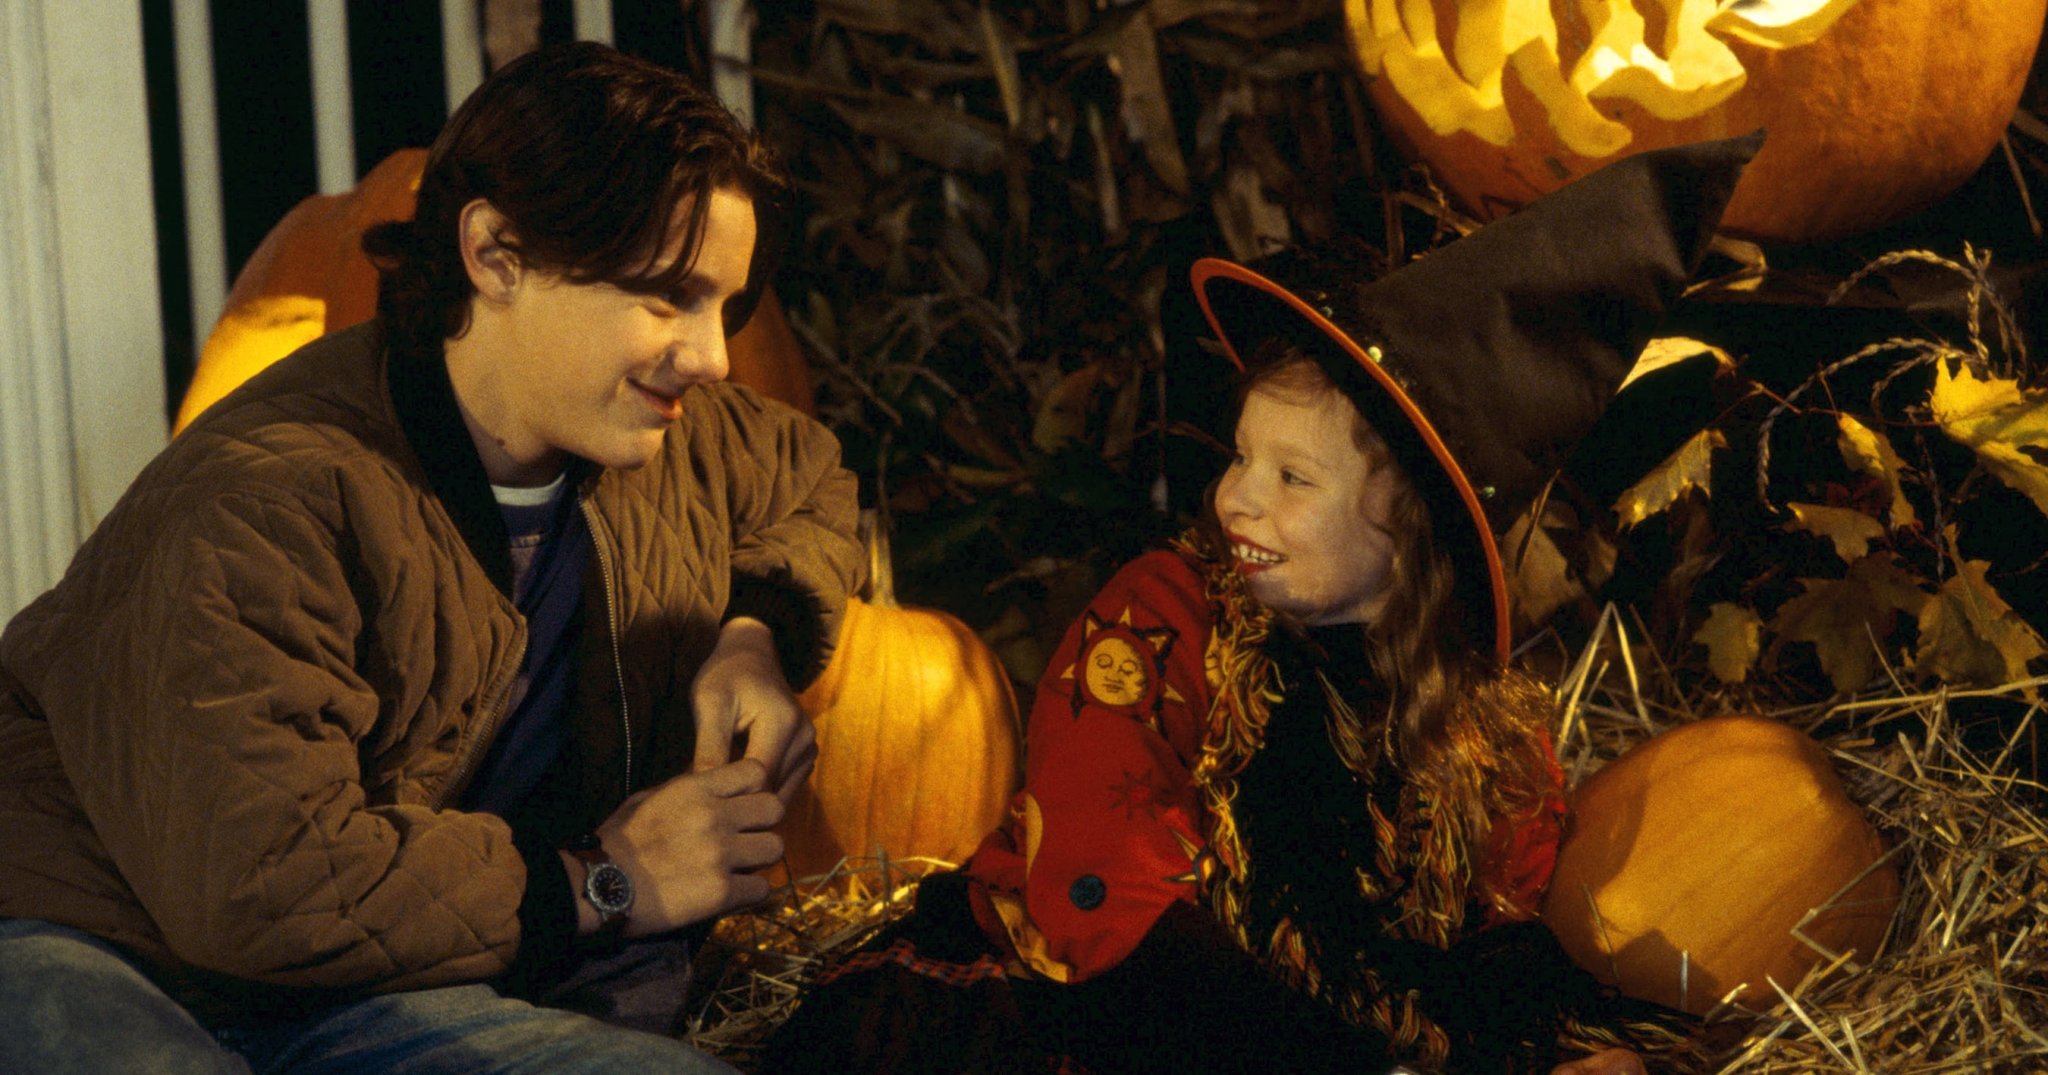 16 Movies Just as Quirky and Spooky as Hocus Pocus